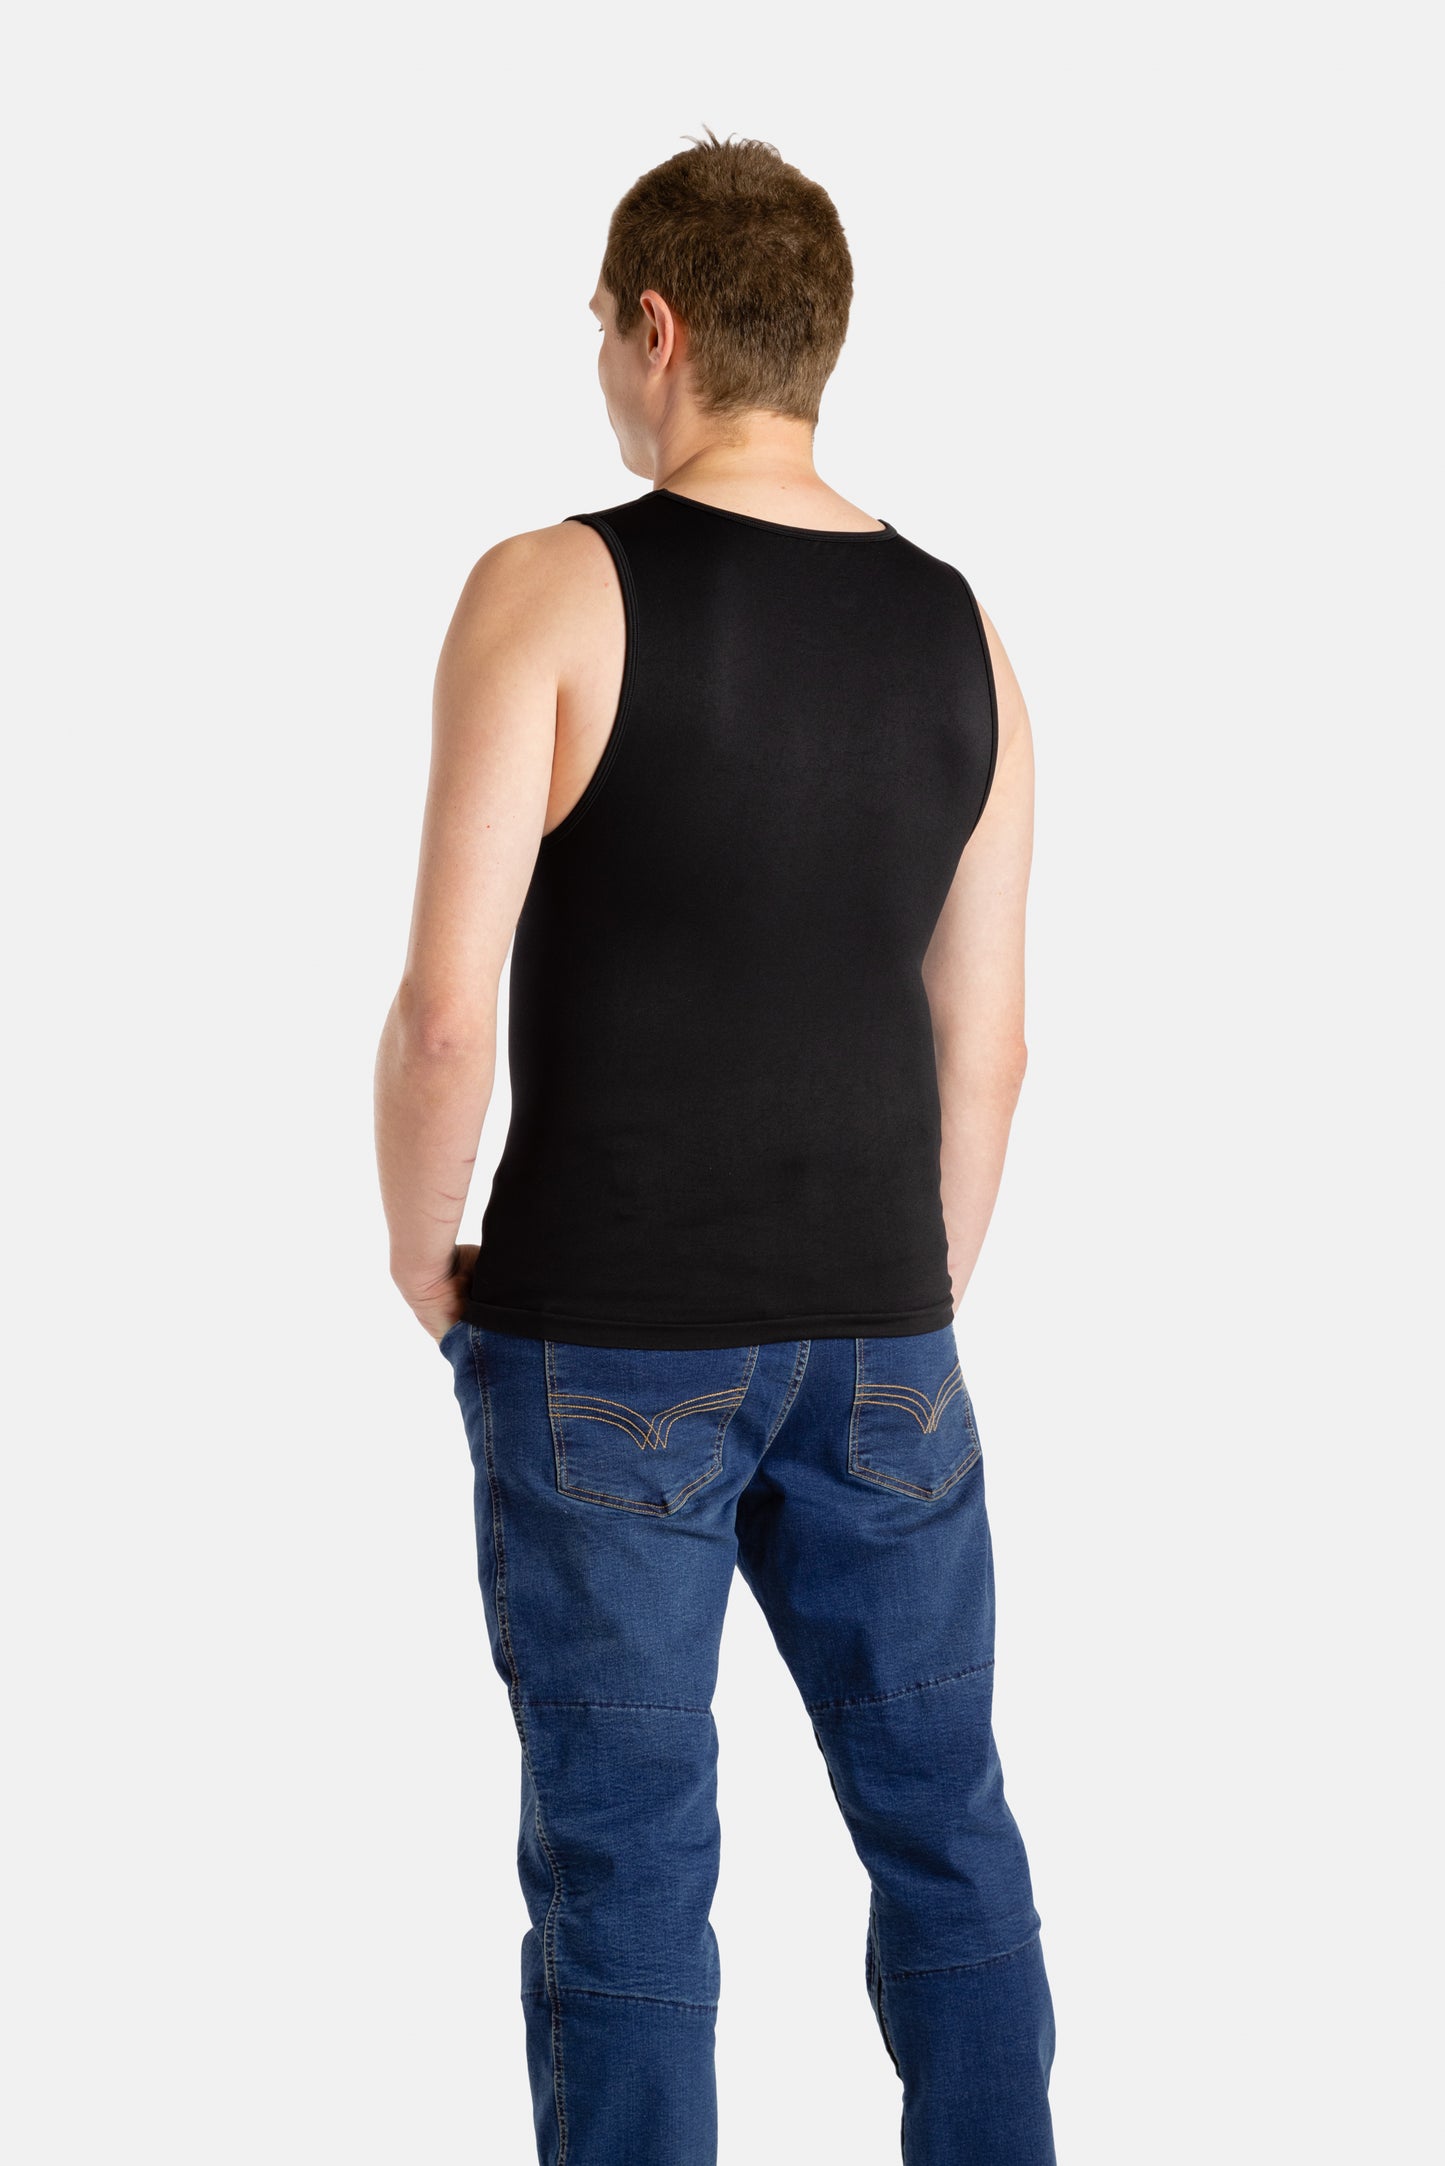 The back of a white man with short brown hair wearing a black tank top and denim jeans.